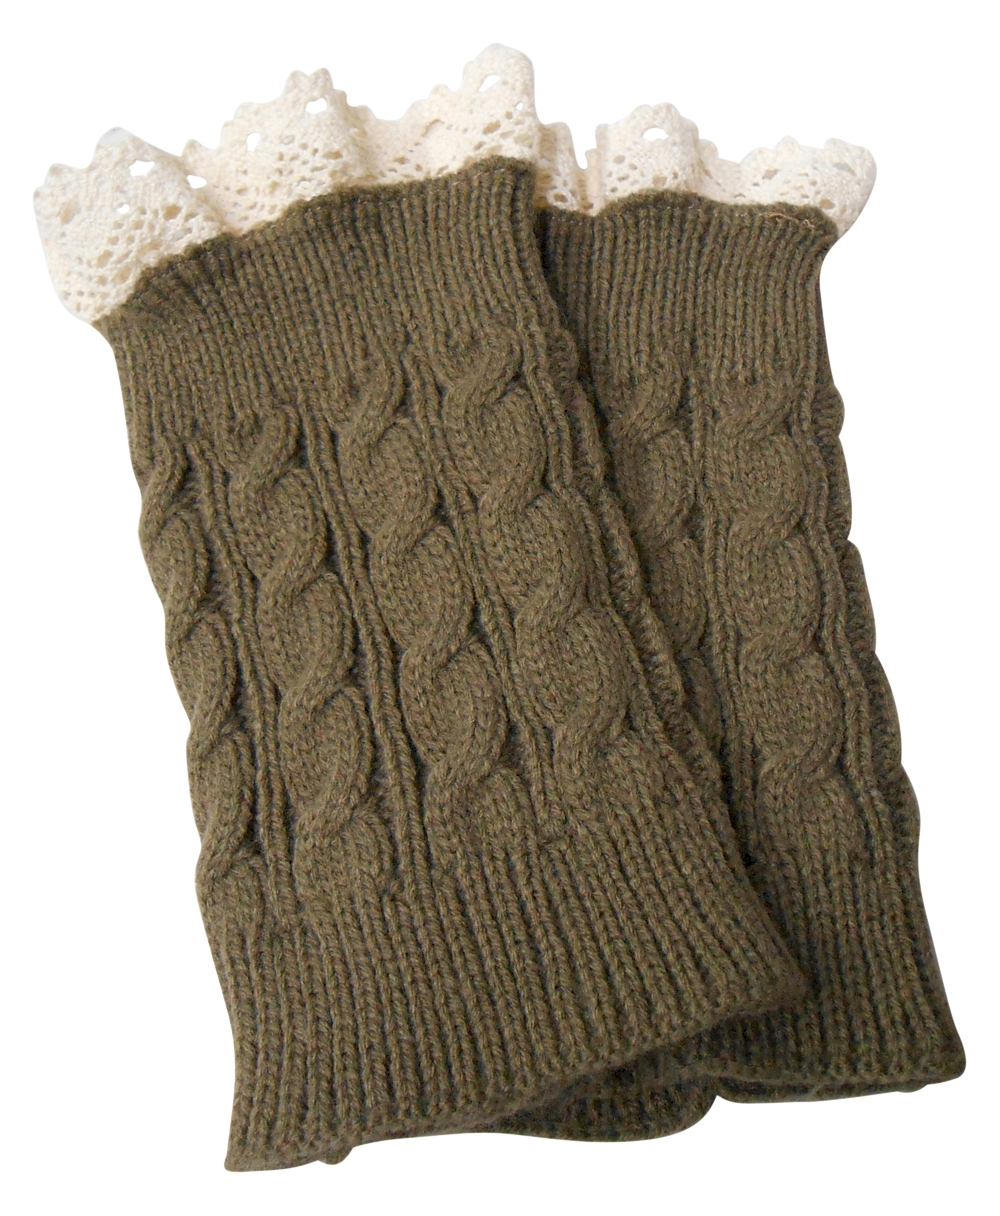 Cable Knit Boot Cuff with Lace Top - BROWN - CLOSEOUT